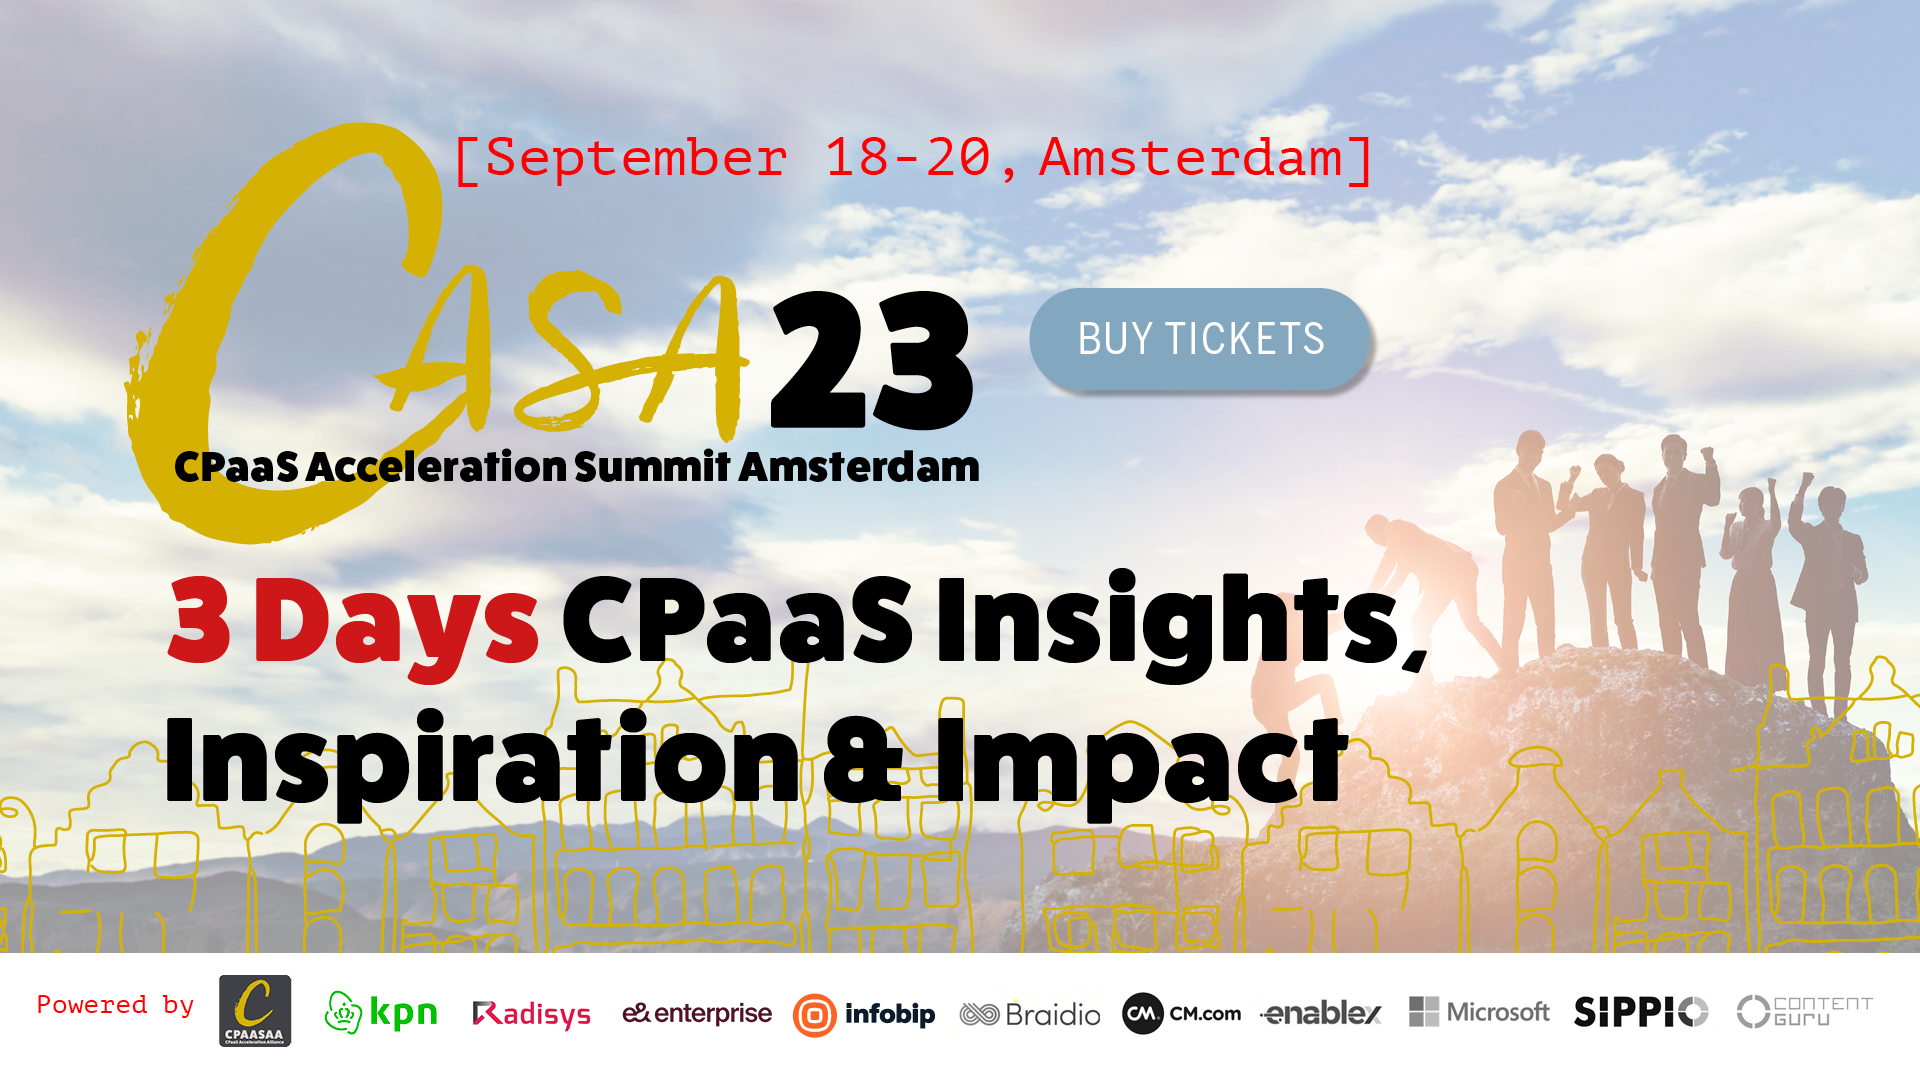 CPaaS Acceleration Summit in Amsterdam